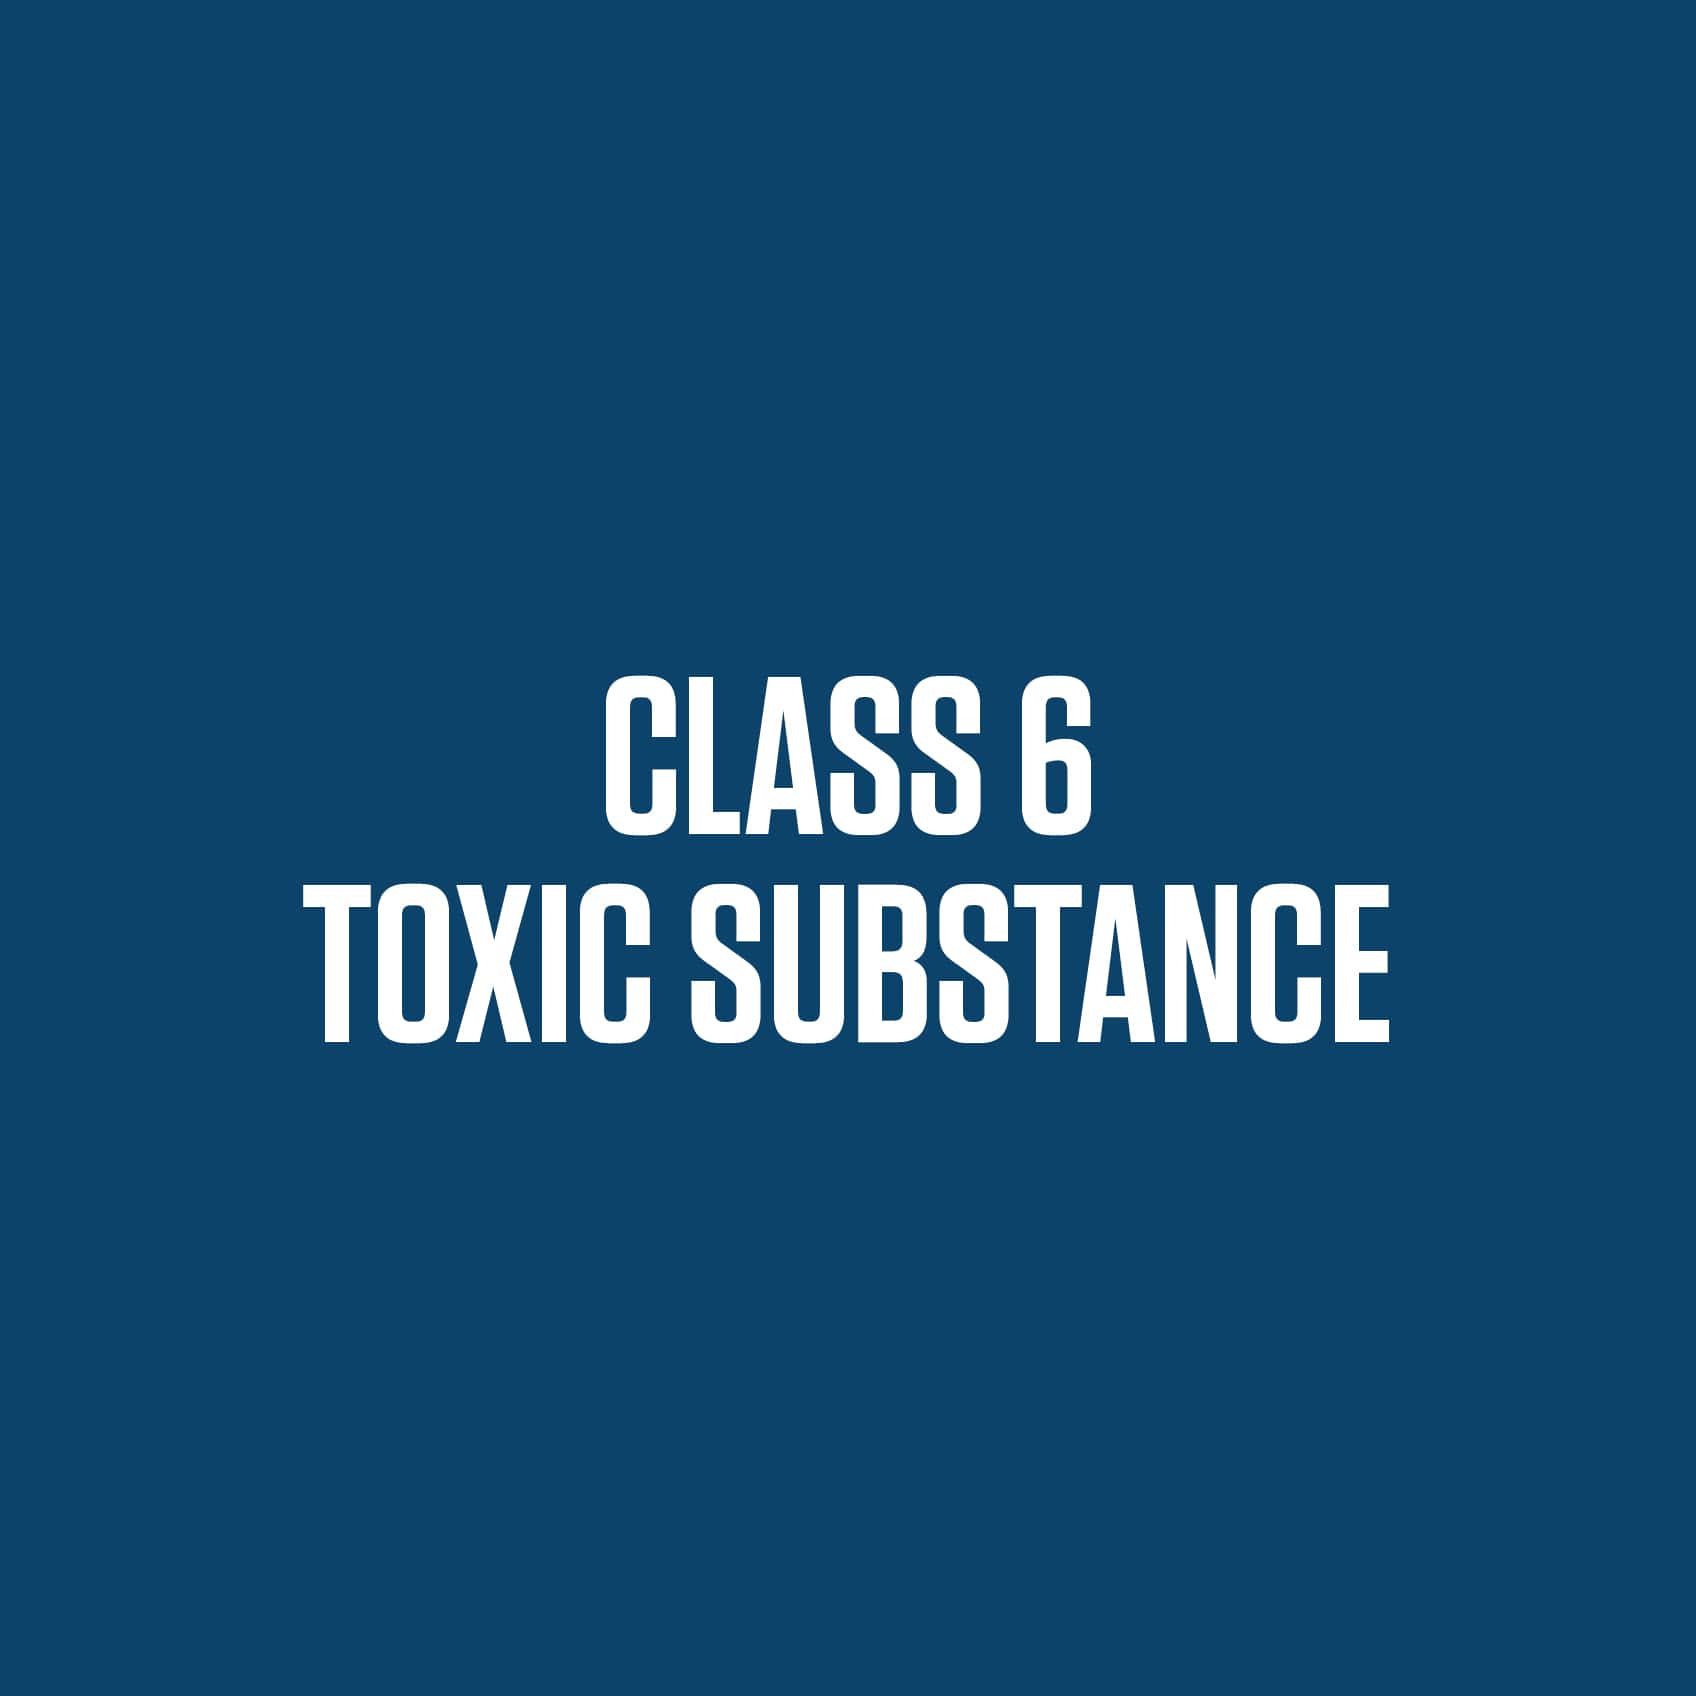 Class 6 Toxic Substance